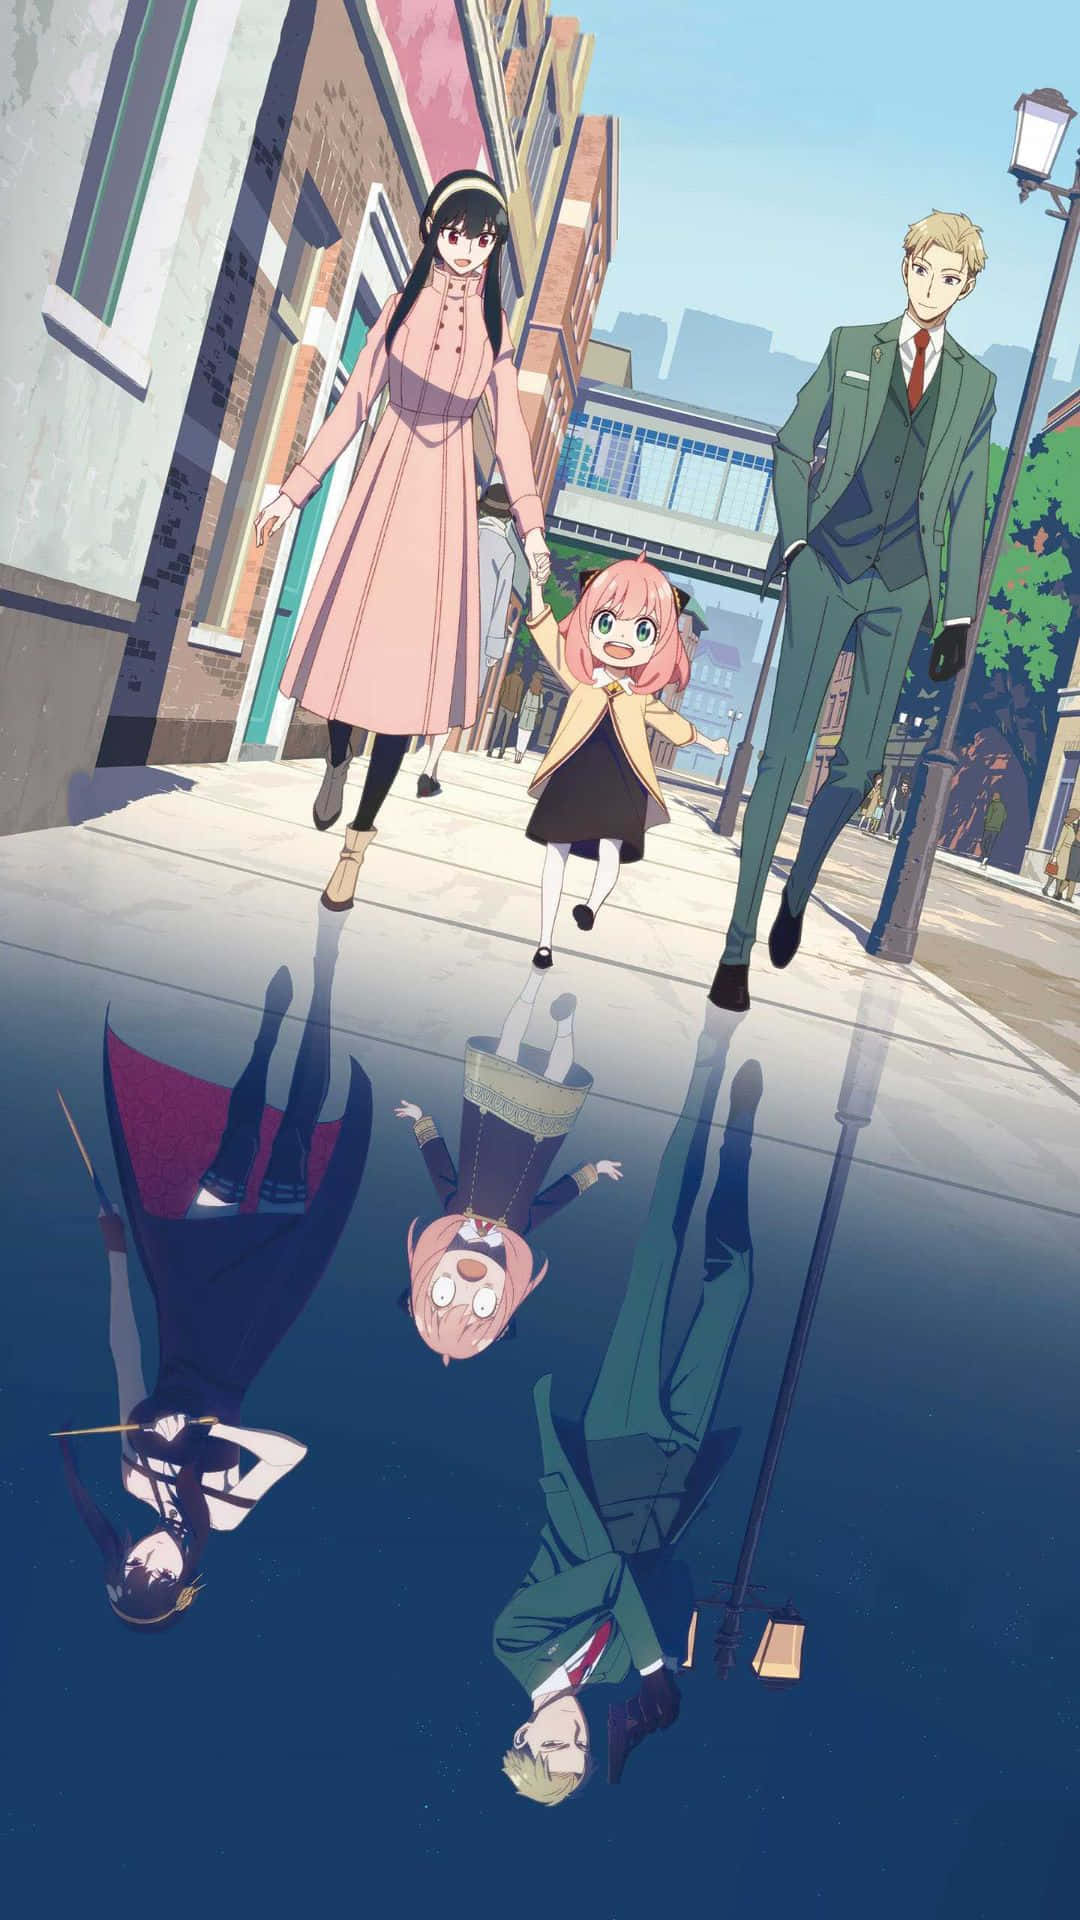 A Group Of People Walking Down The Street In An Anime Wallpaper